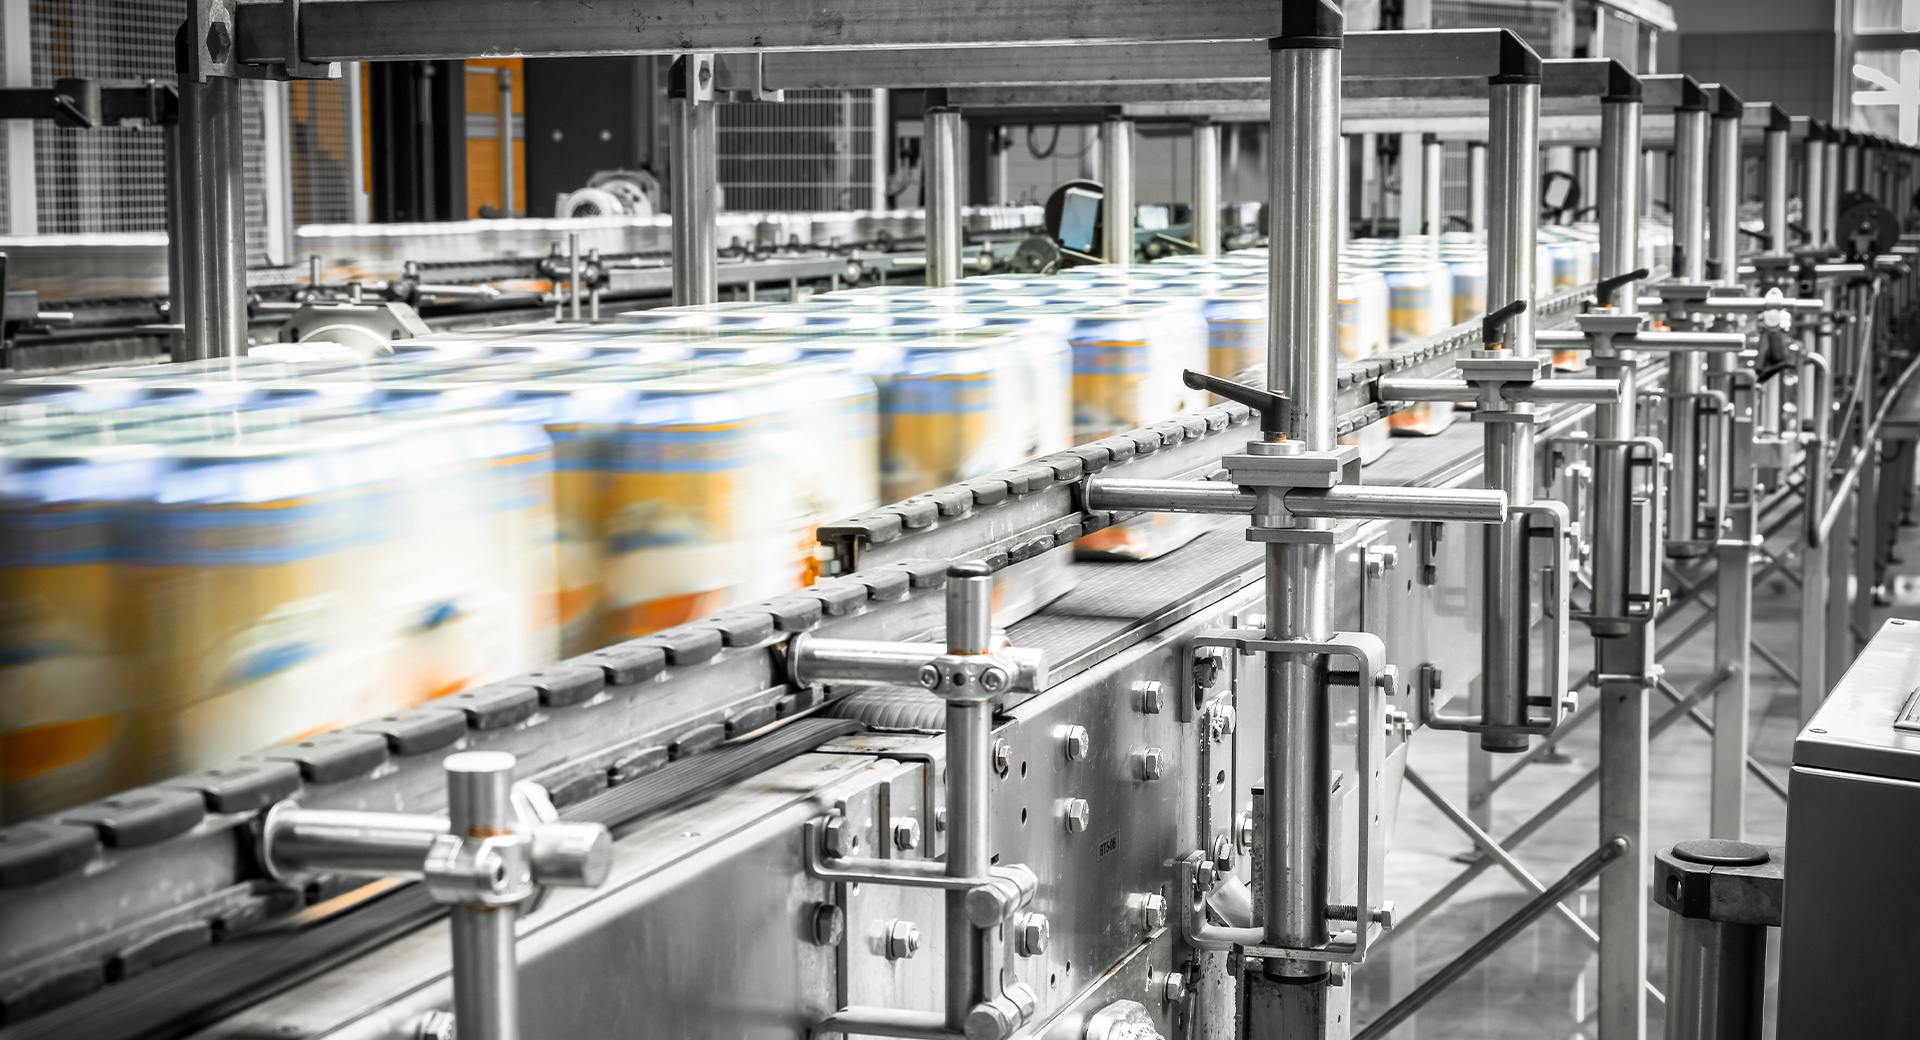 Cans going through the assembly line in batches.  All the cans have labels, indicating they are moving fast.